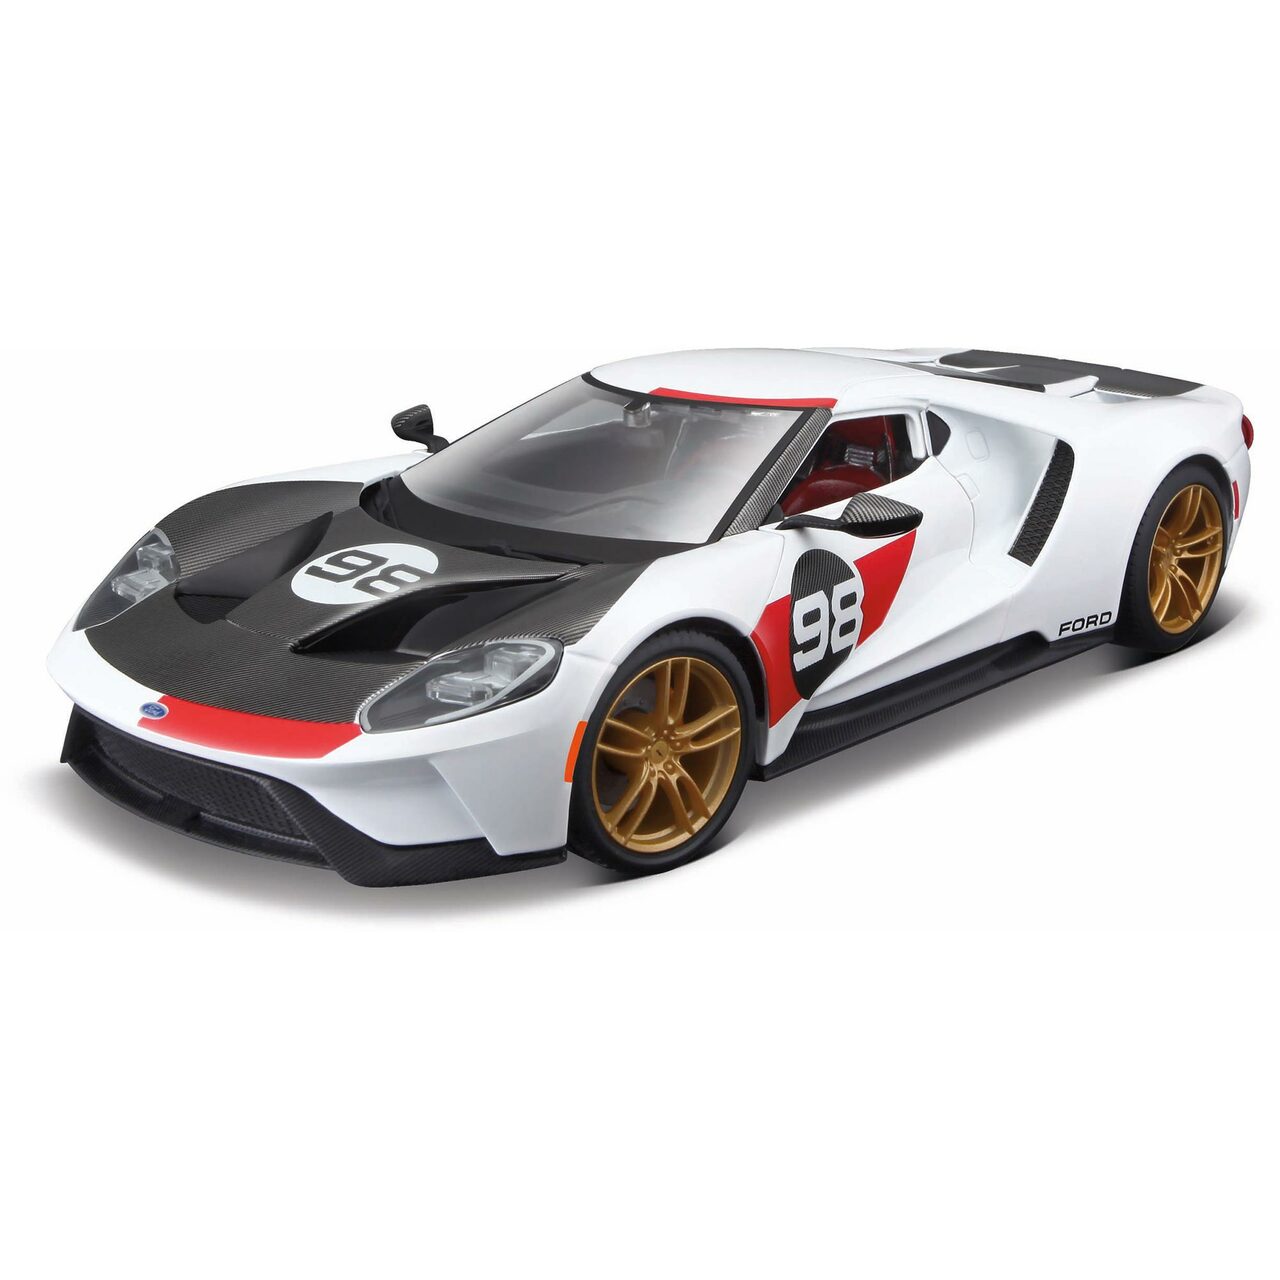 Игрушечная машинка Maisto Ford GT Heritage 2021, 1:18, белая 31390 maisto 1 24 1970 ford mustang boss 302 mustang roadster ford mustang simulation alloy car model collection gift toy